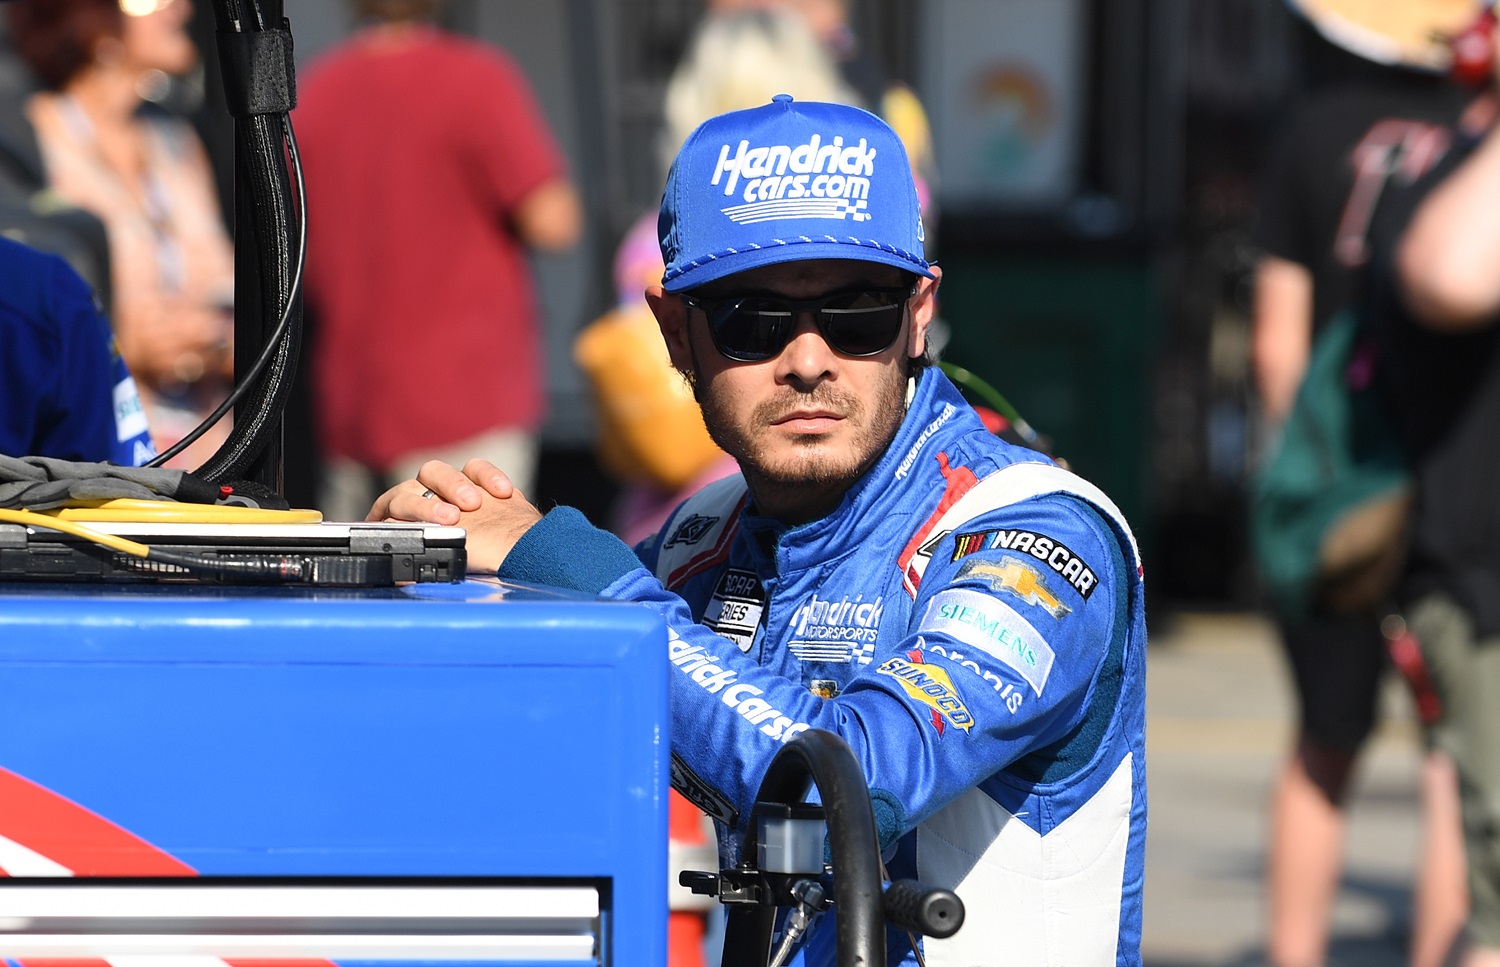 Kyle Larson looks on during qualifying for the NASCAR Cup Series Playoff Bass Pro Shops Night Race on Sept. 16, 2022, at Bristol Motor Speedway. | Jeffrey Vest/Icon Sportswire via Getty Images